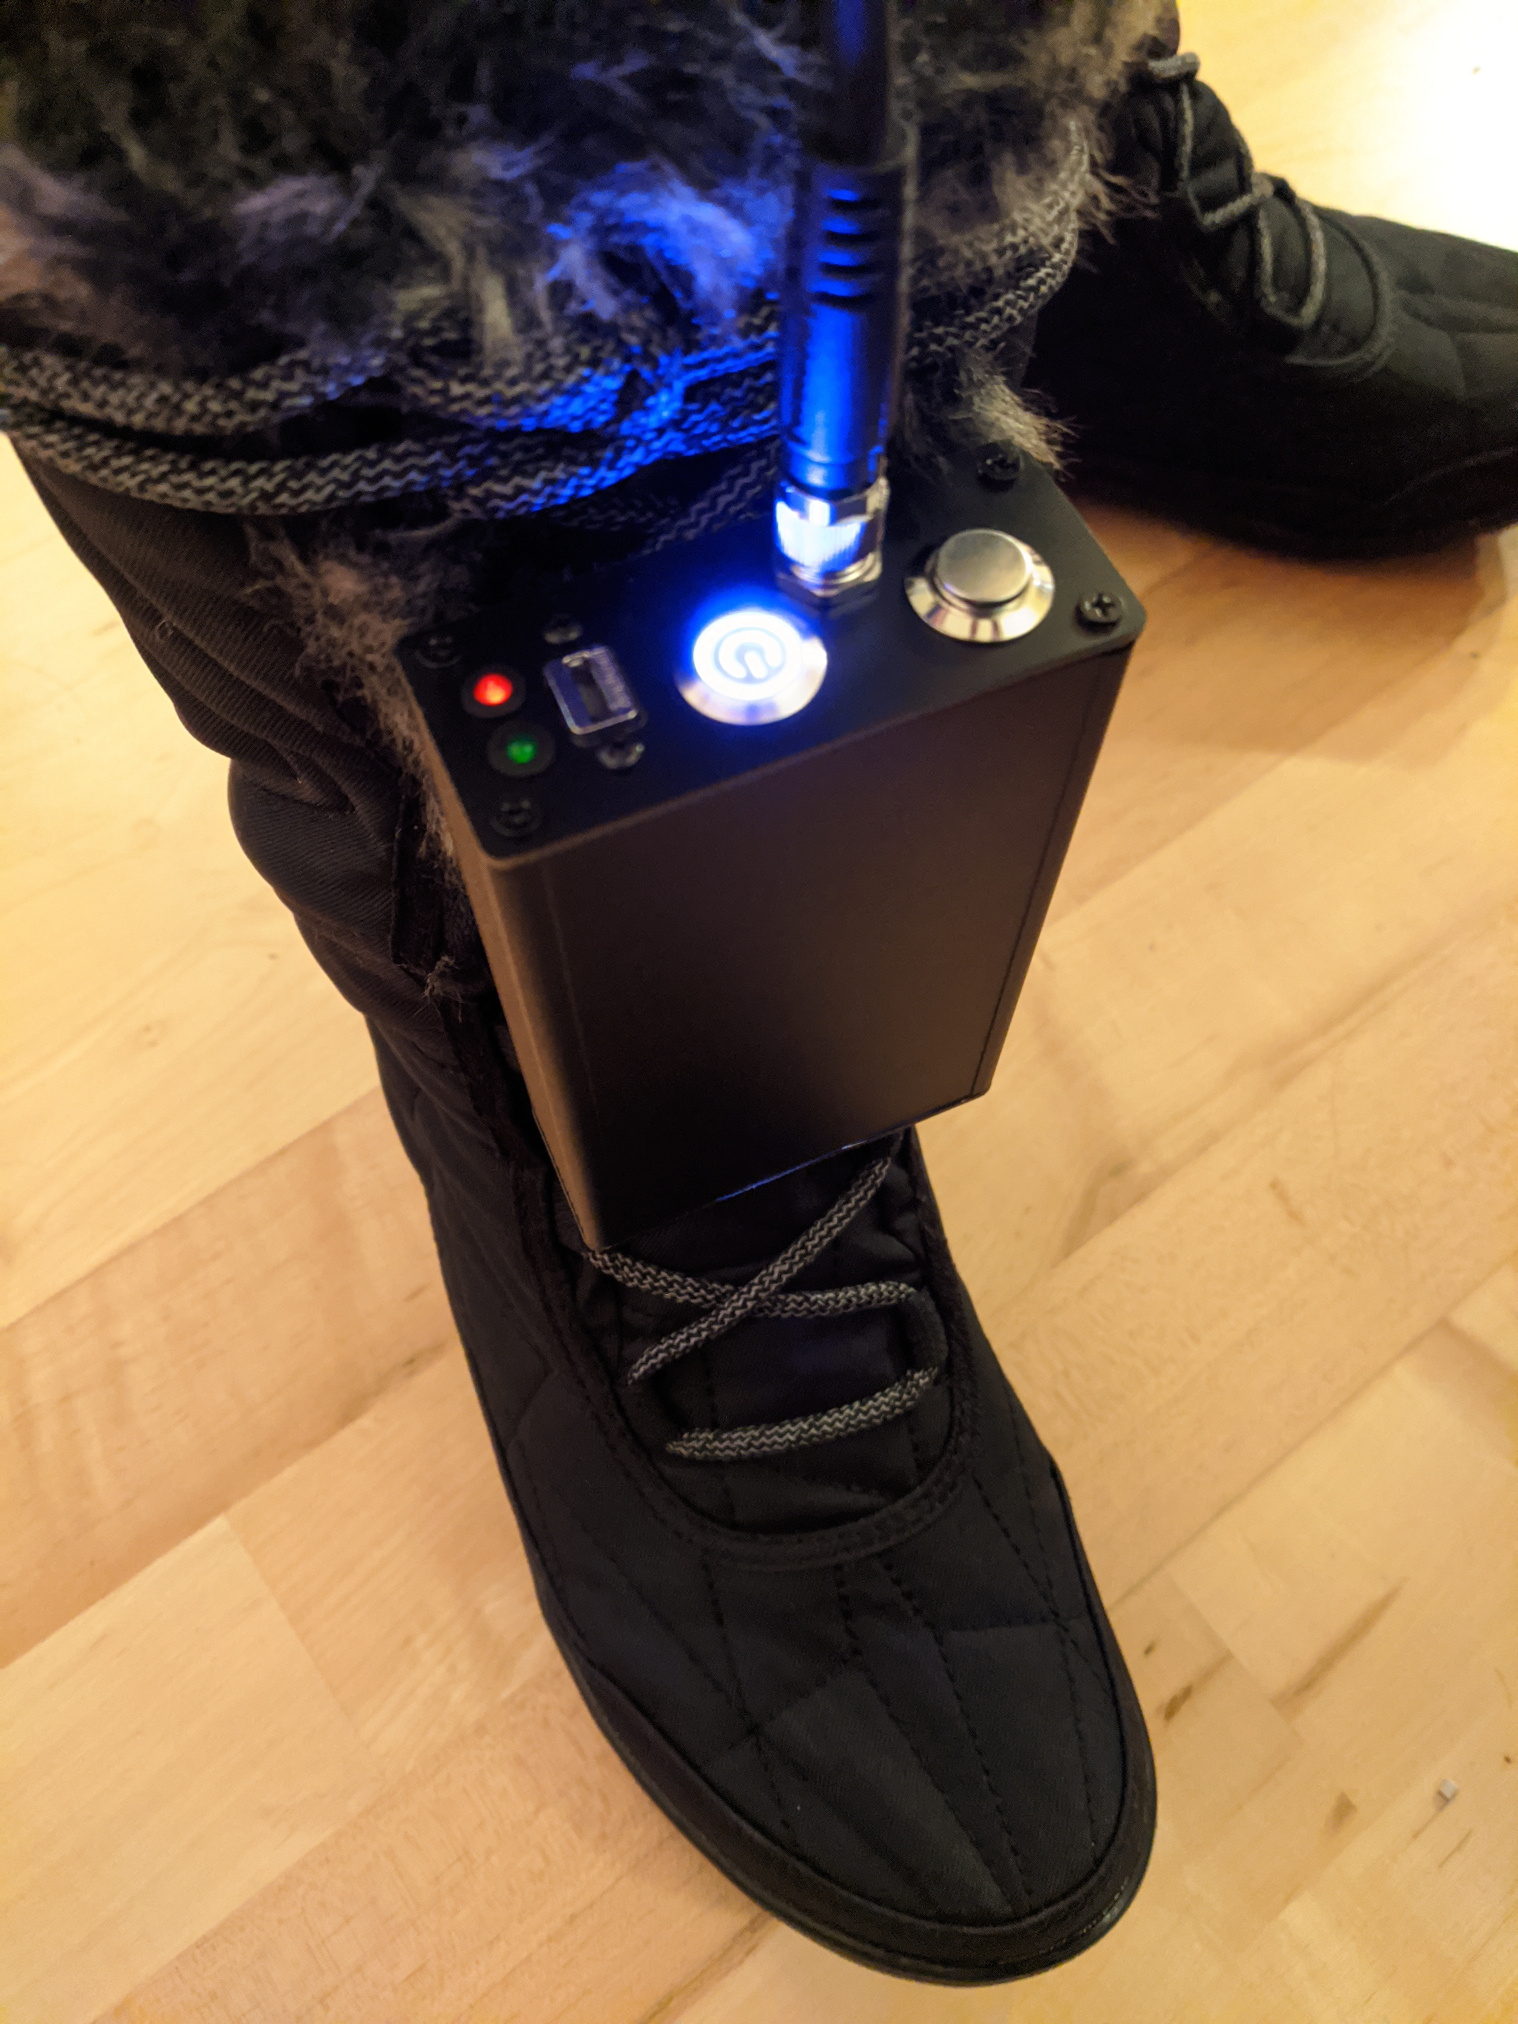 Project enclosure mounted on the front of the right boot.